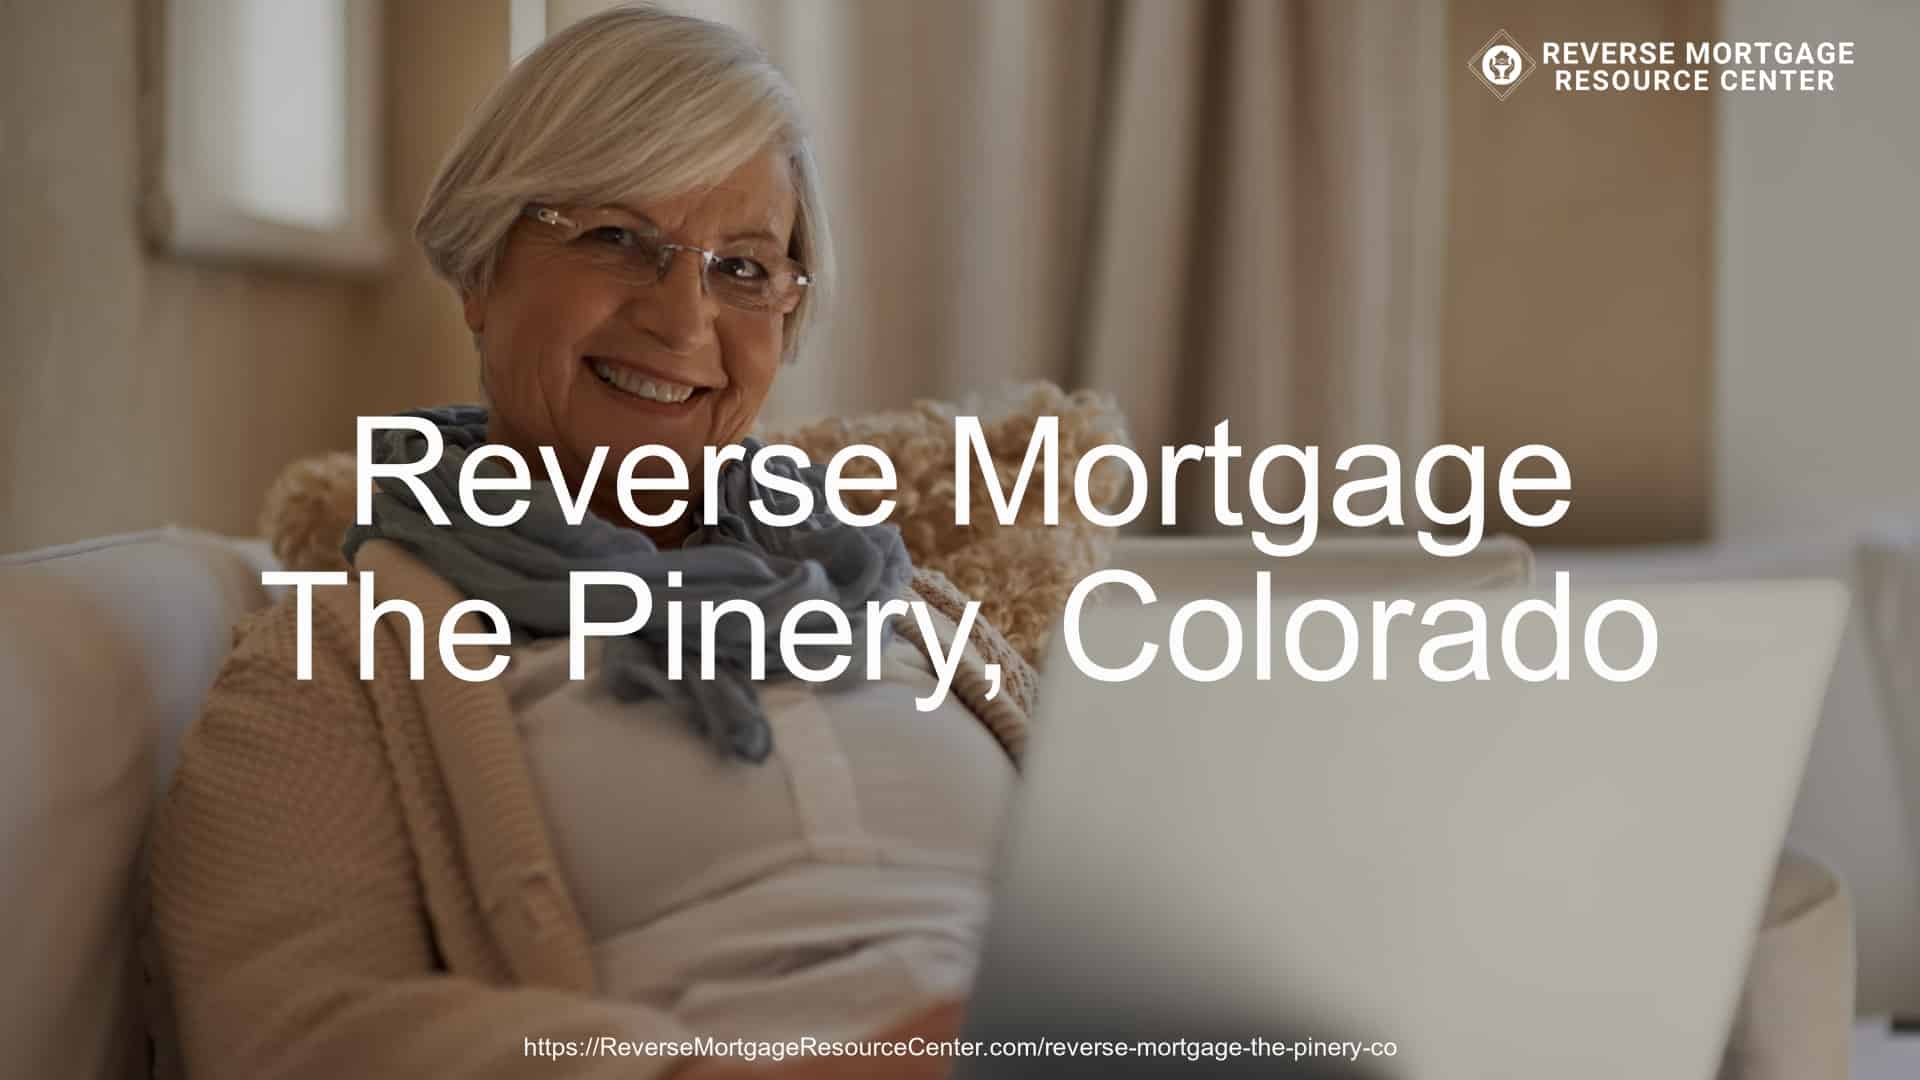 Reverse Mortgage Loans in The Pinery Colorado